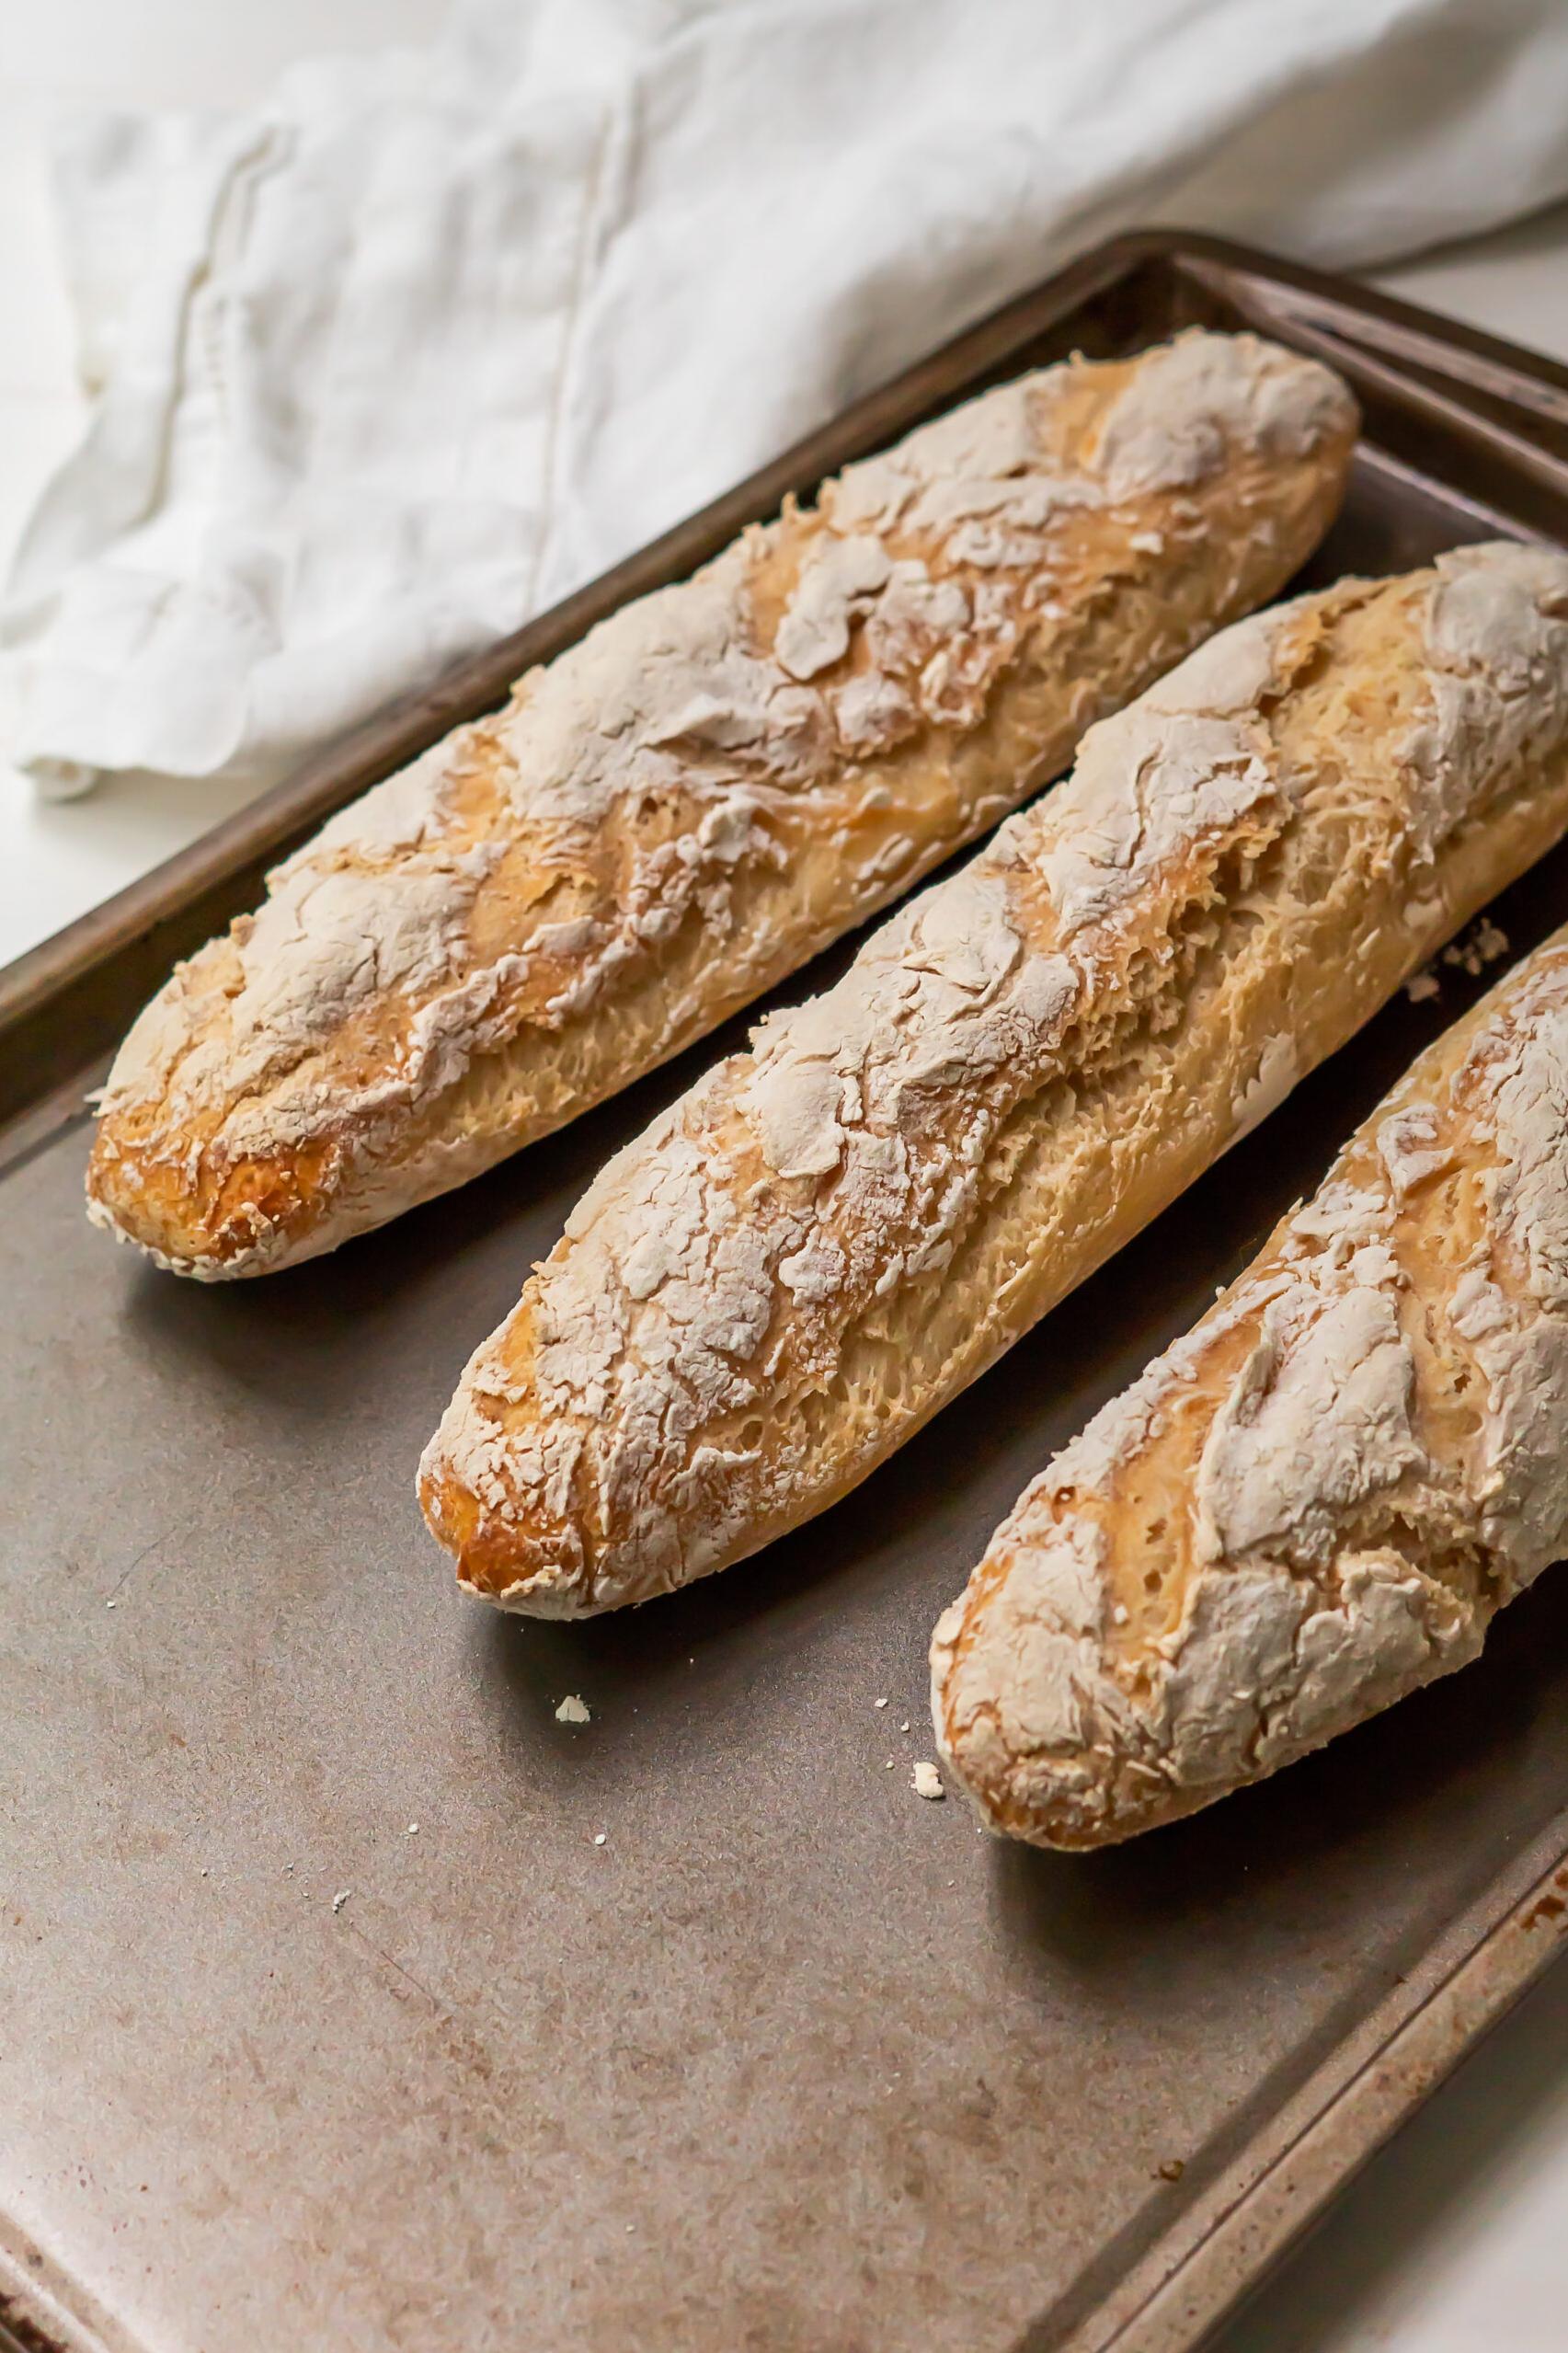 Get Your Gluten-Free French Bread Recipe Here!